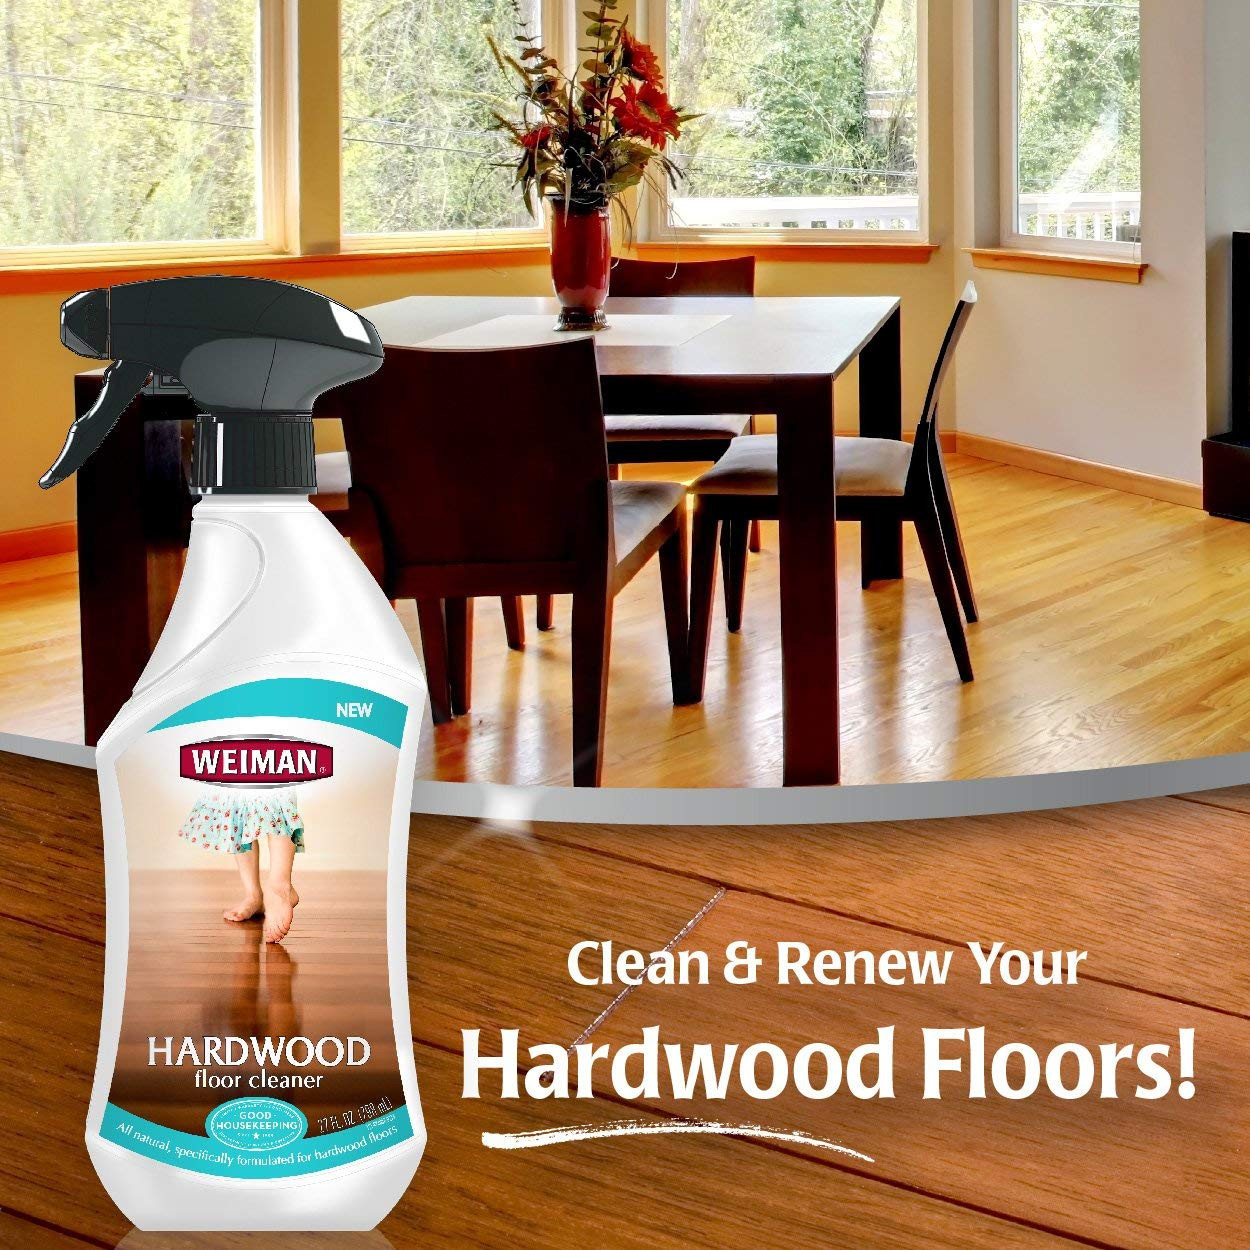 best floor cleaner for laminate hardwood of amazon com weiman hardwood floor cleaner surface safe no harsh in amazon com weiman hardwood floor cleaner surface safe no harsh scent safe for use around kids and pets residue free 27 oz trigger home kitchen